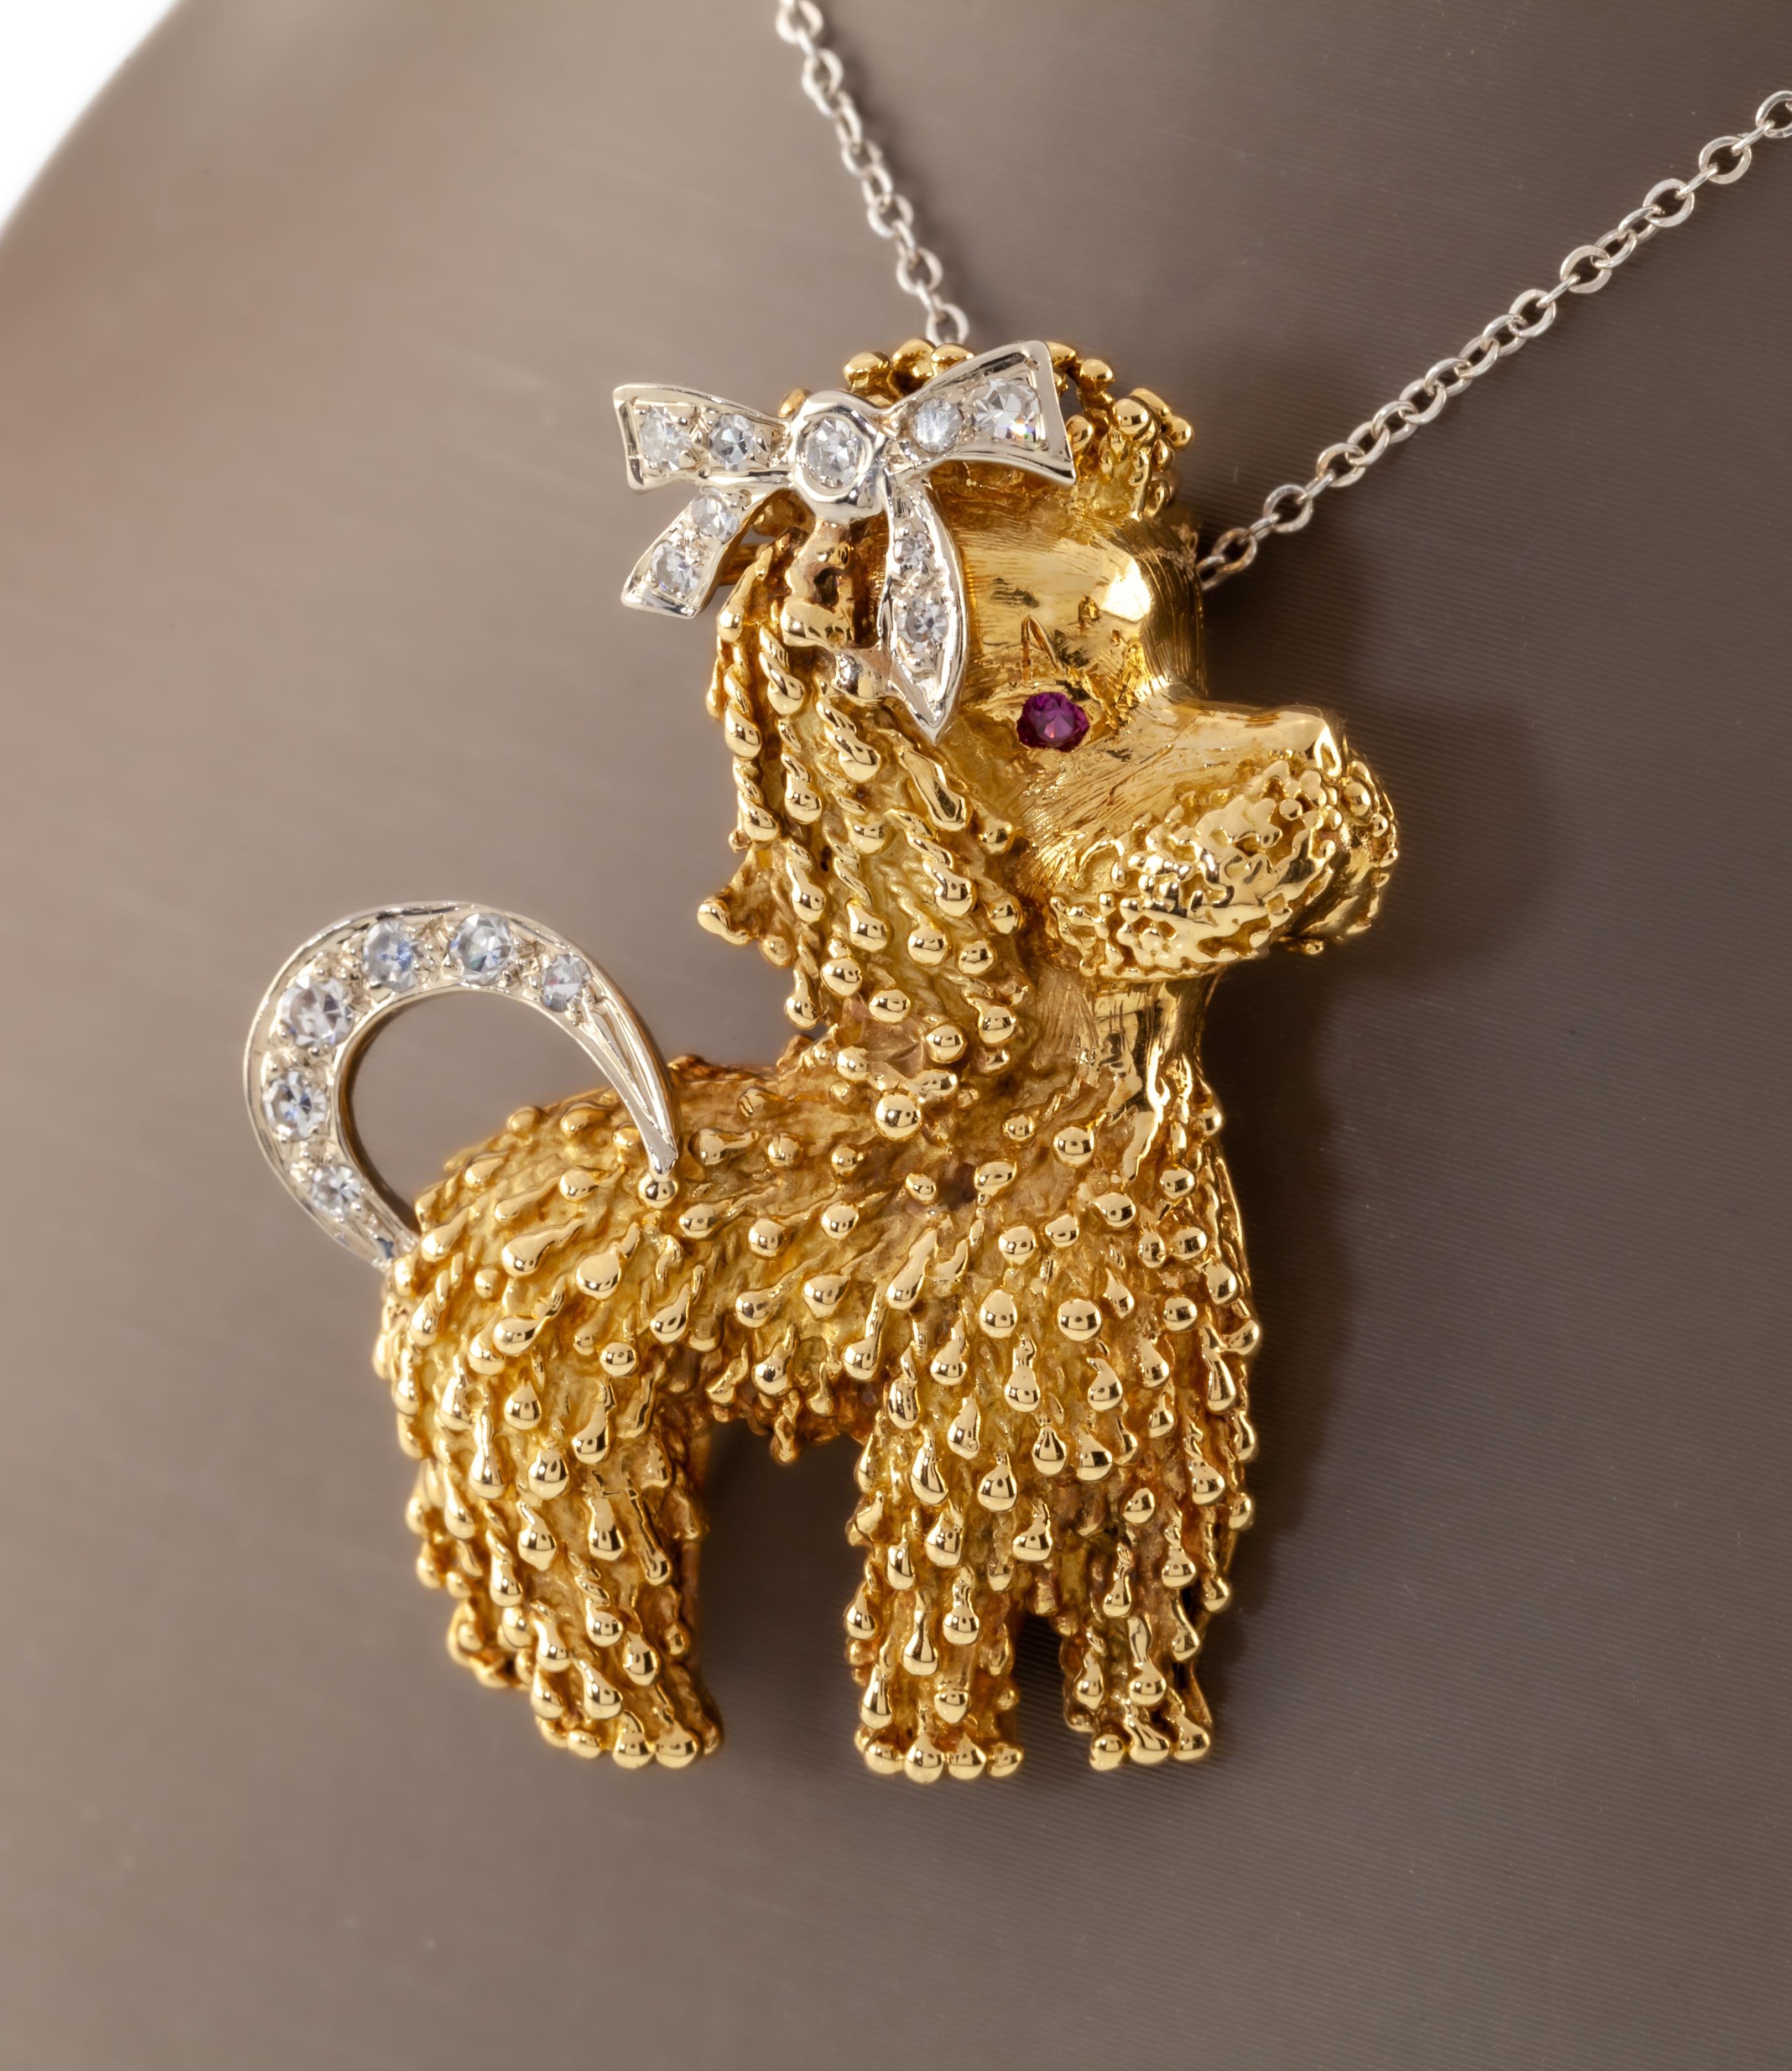 18k Yellow Gold Poodle Brooch Featuring Diamond & Ruby Accents with Certificate For Sale 5